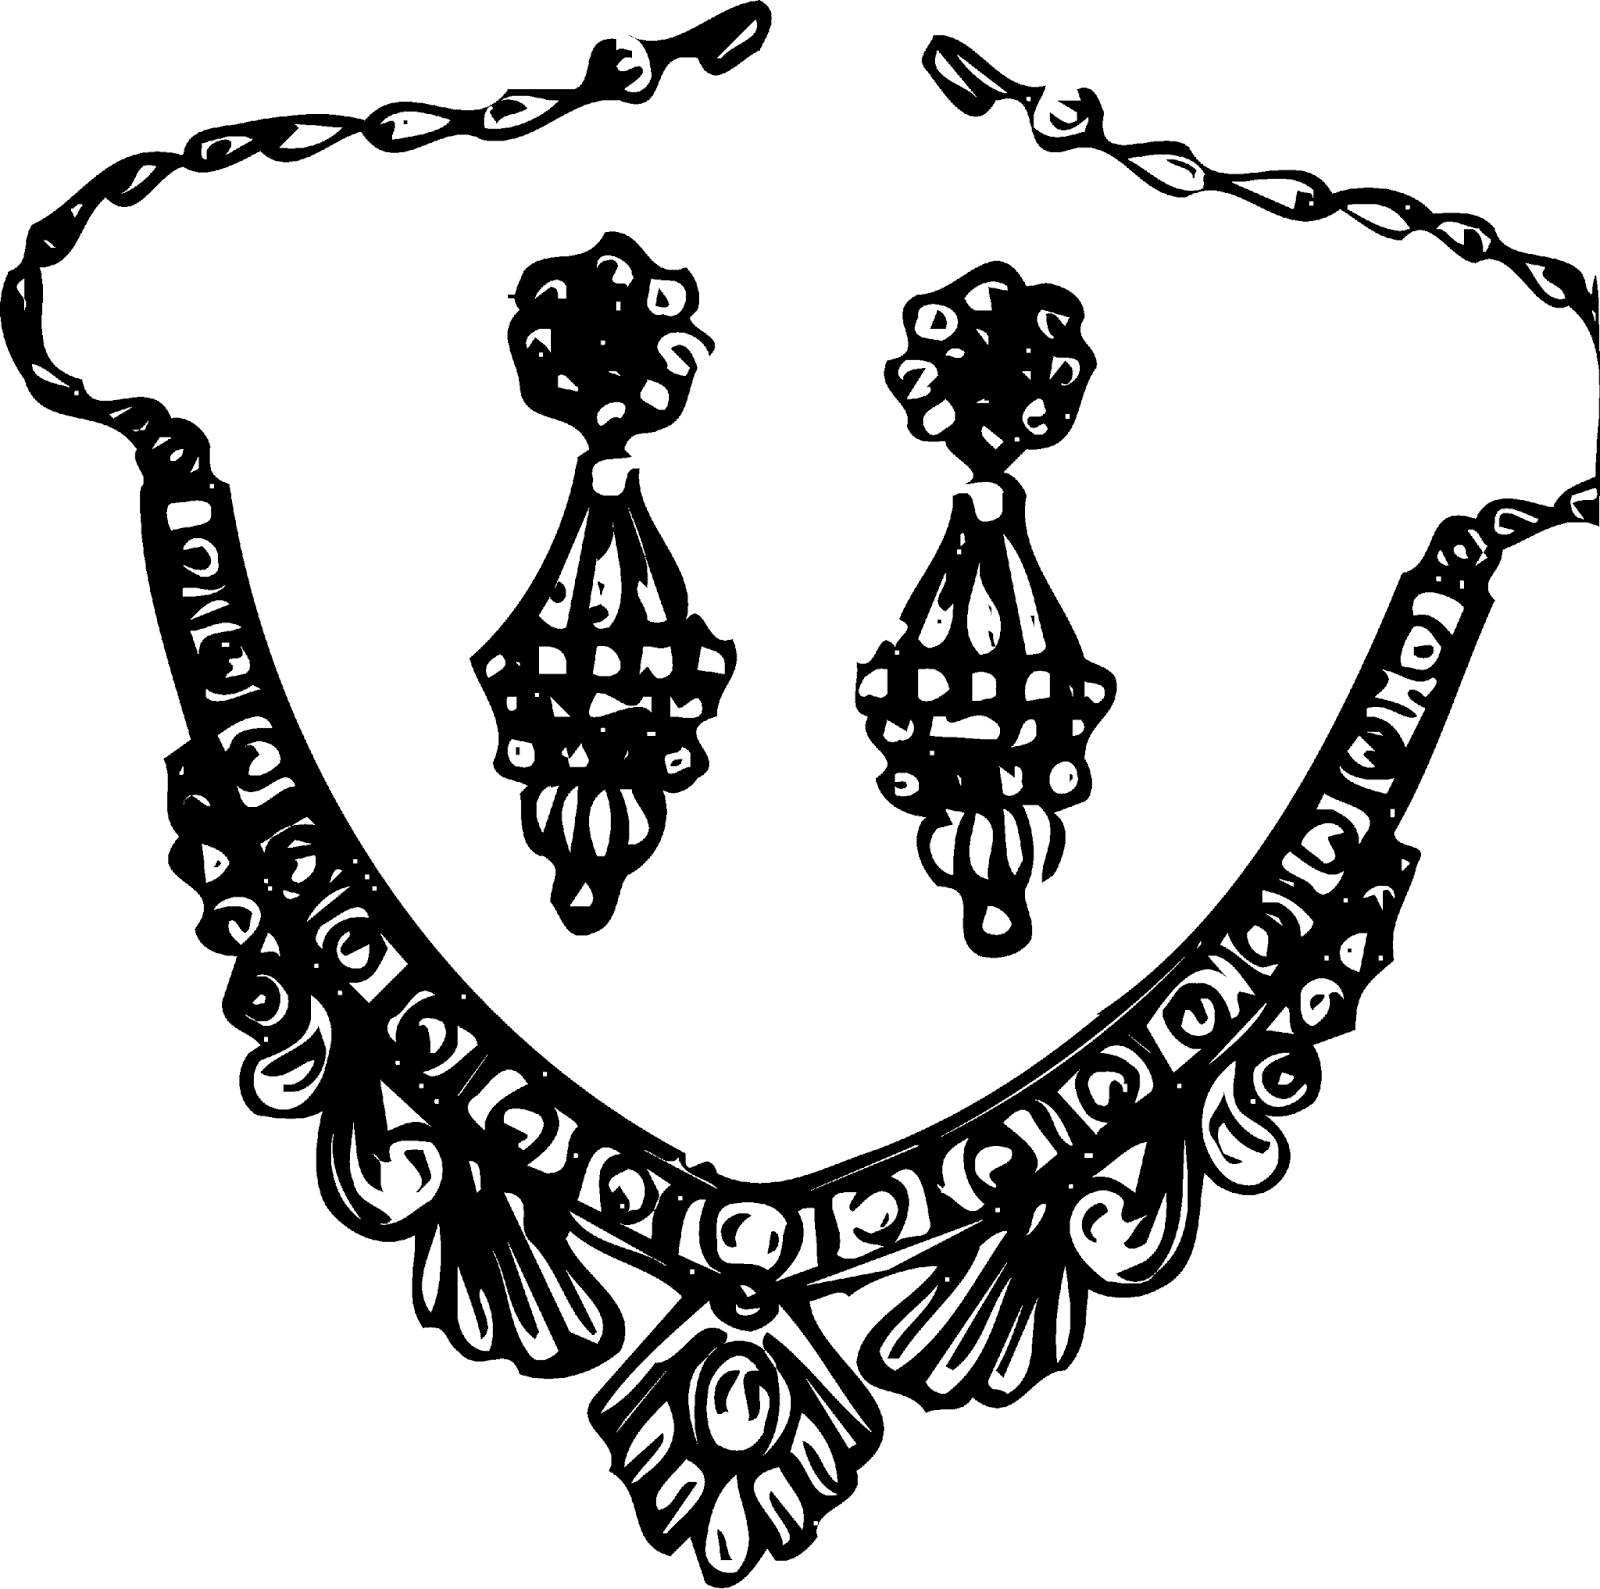 Jewelry clipart black and white - ClipartFest